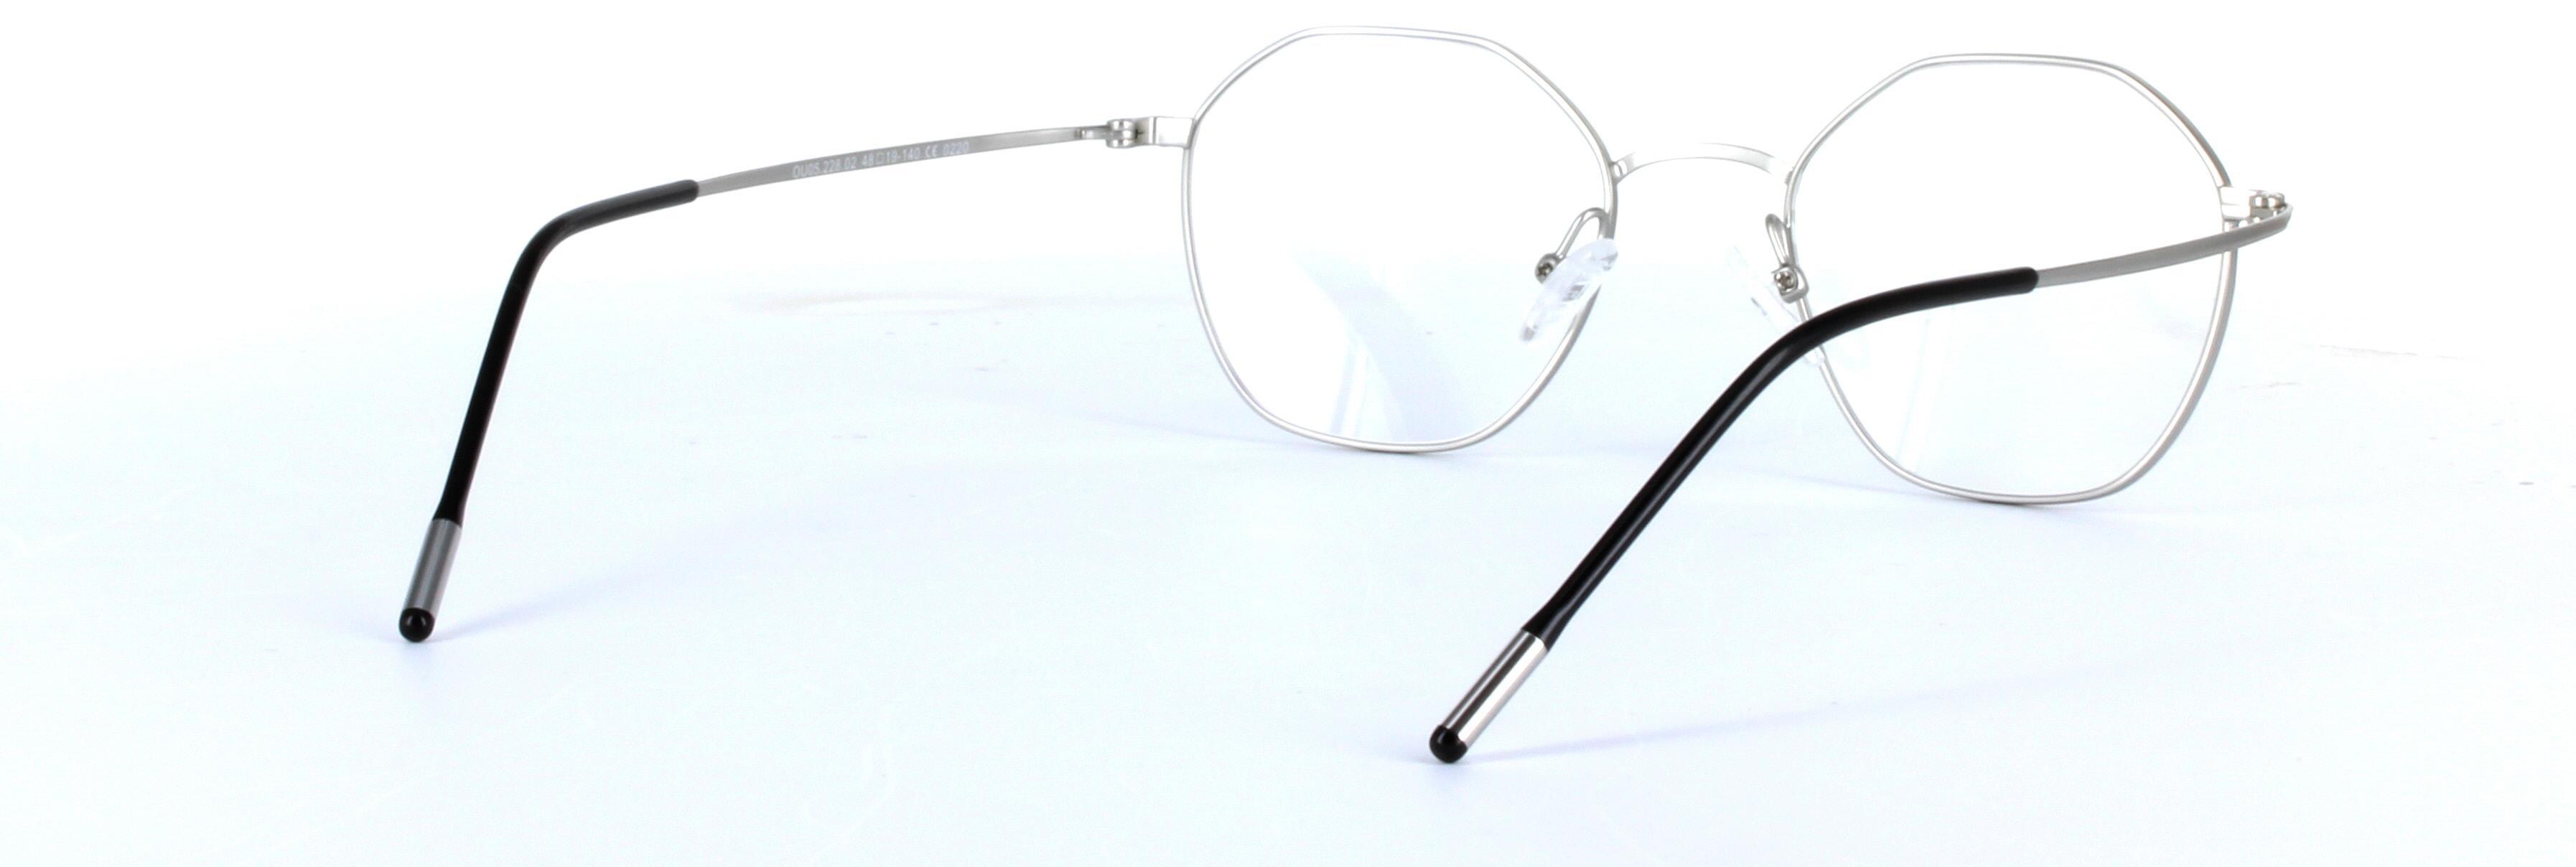 Maiver Silver and Black Full Rim Round Metal Glasses - Image View 4